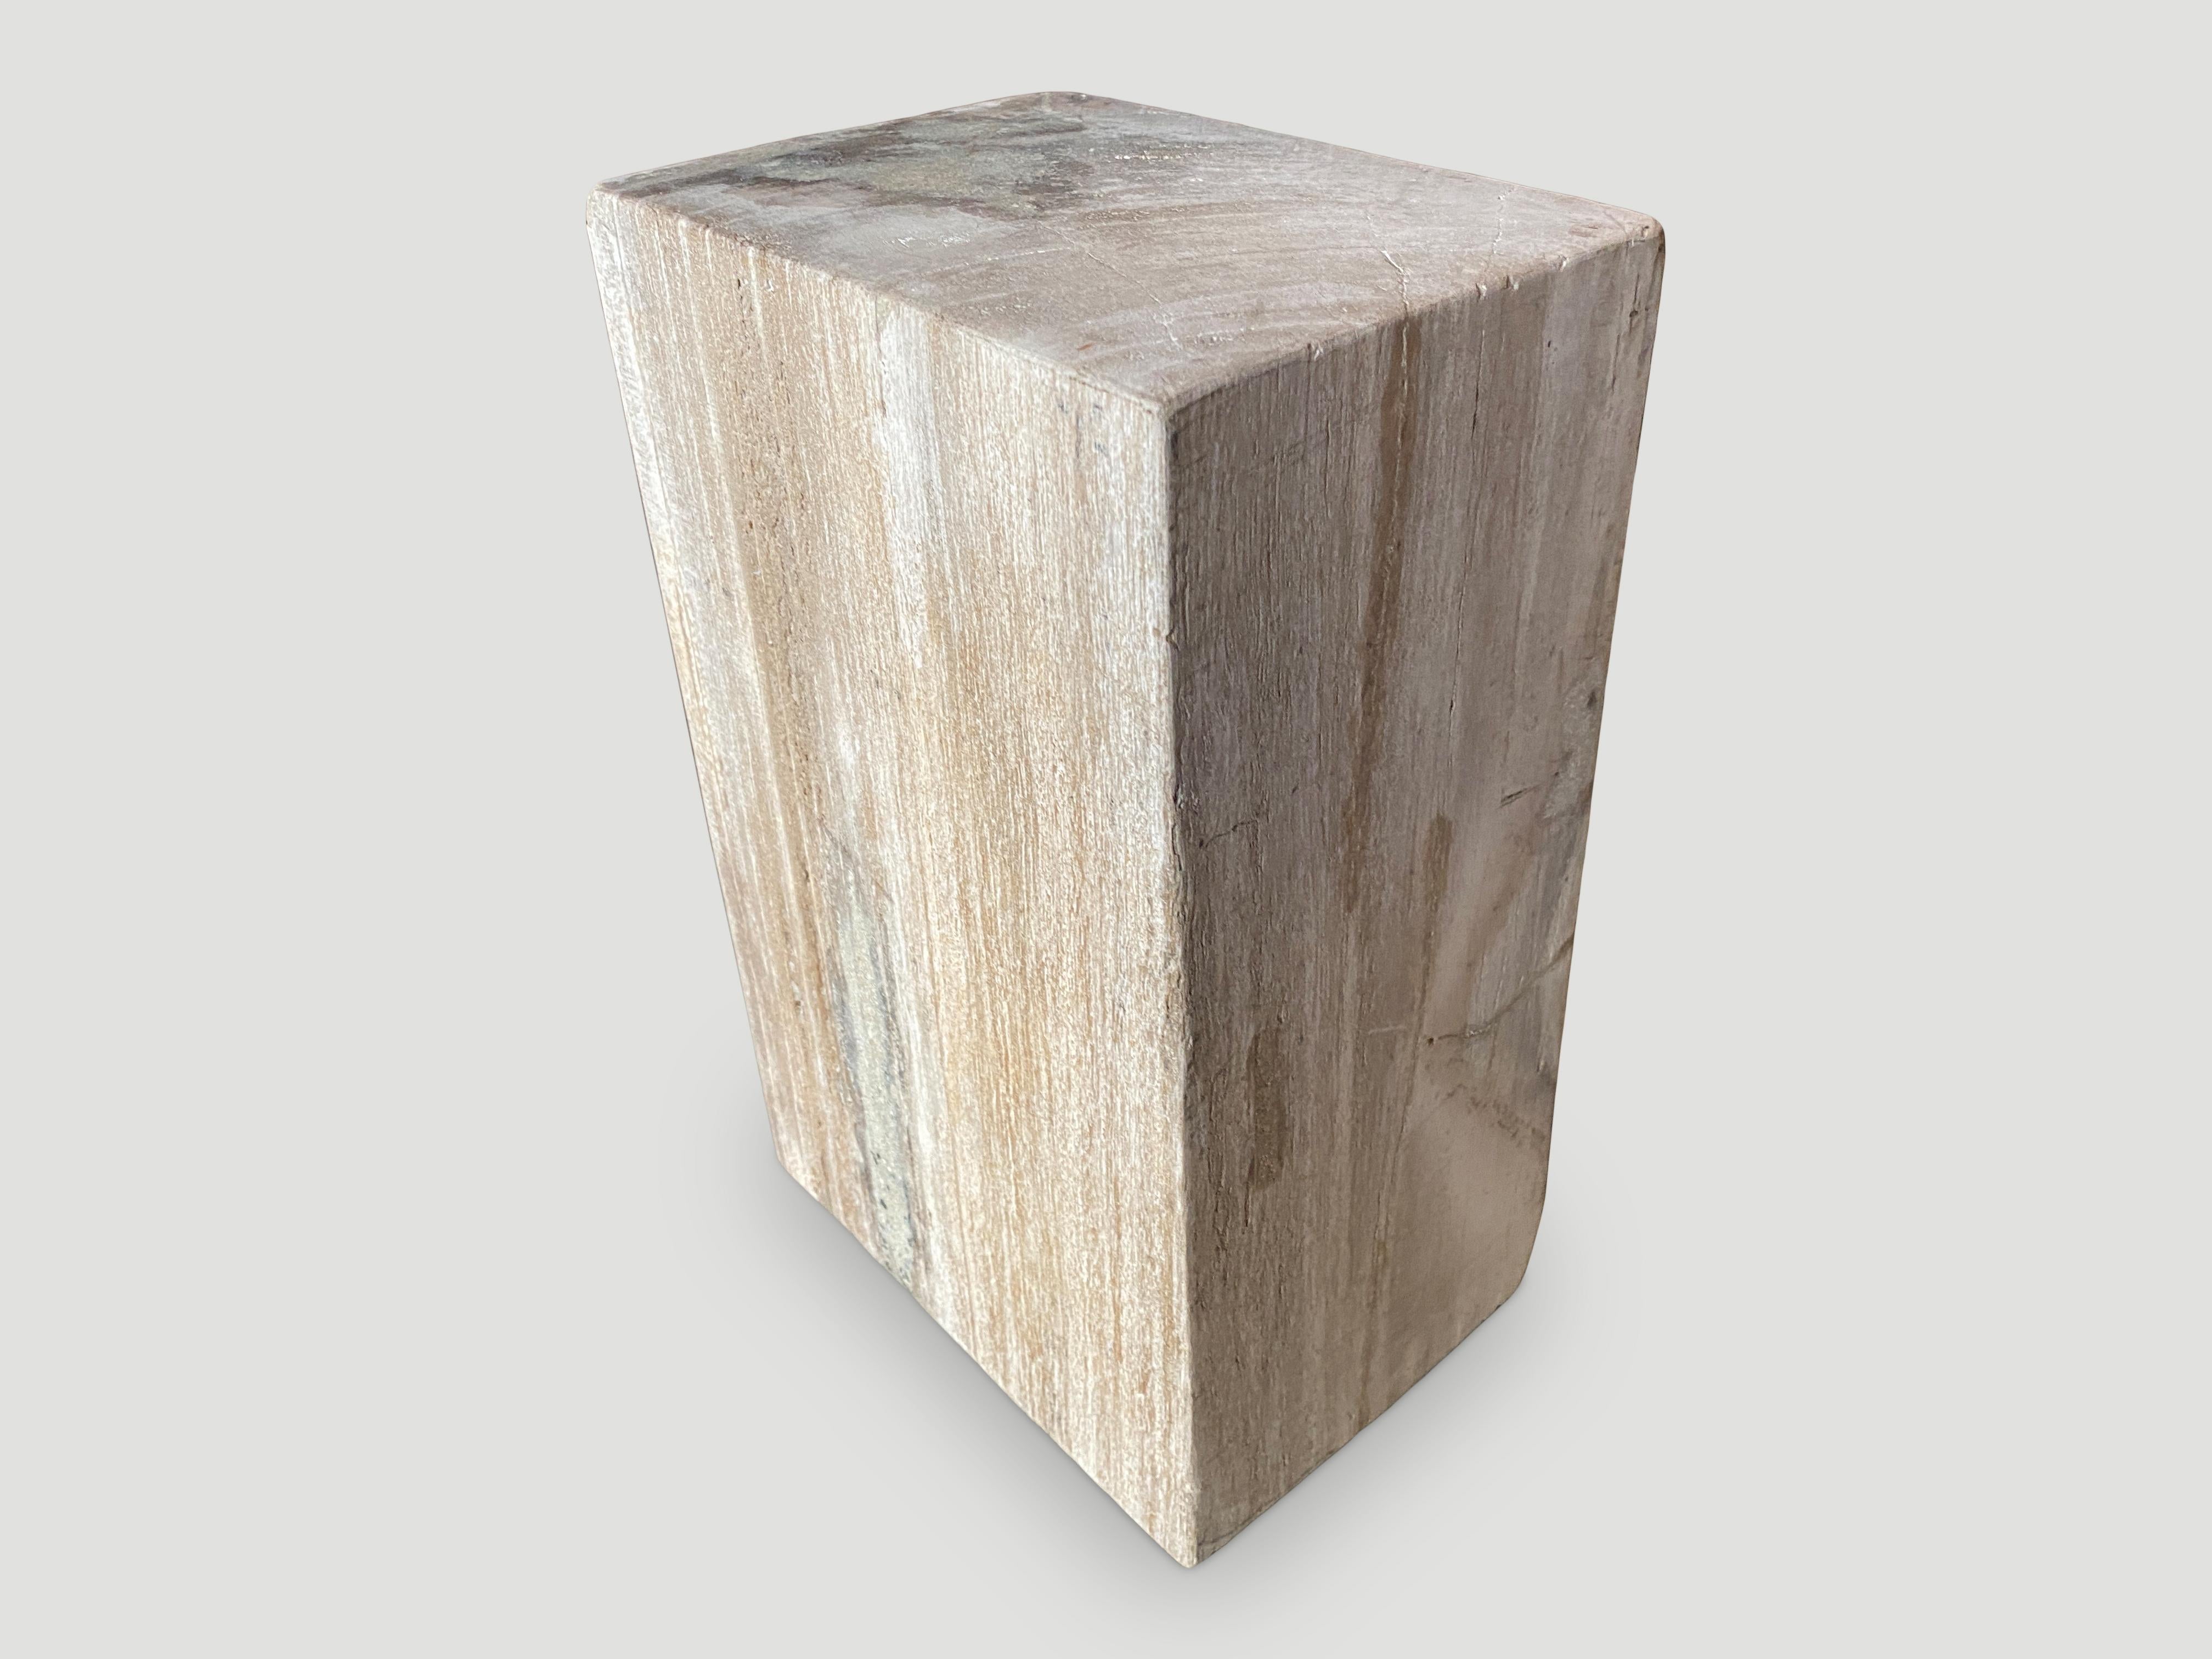 Beautiful beige tones in this minimalist petrified wood side table. It’s fascinating how Mother Nature produces these exquisite 40 million year old petrified teak logs with such contrasting colors and natural patterns throughout. Modern yet with so